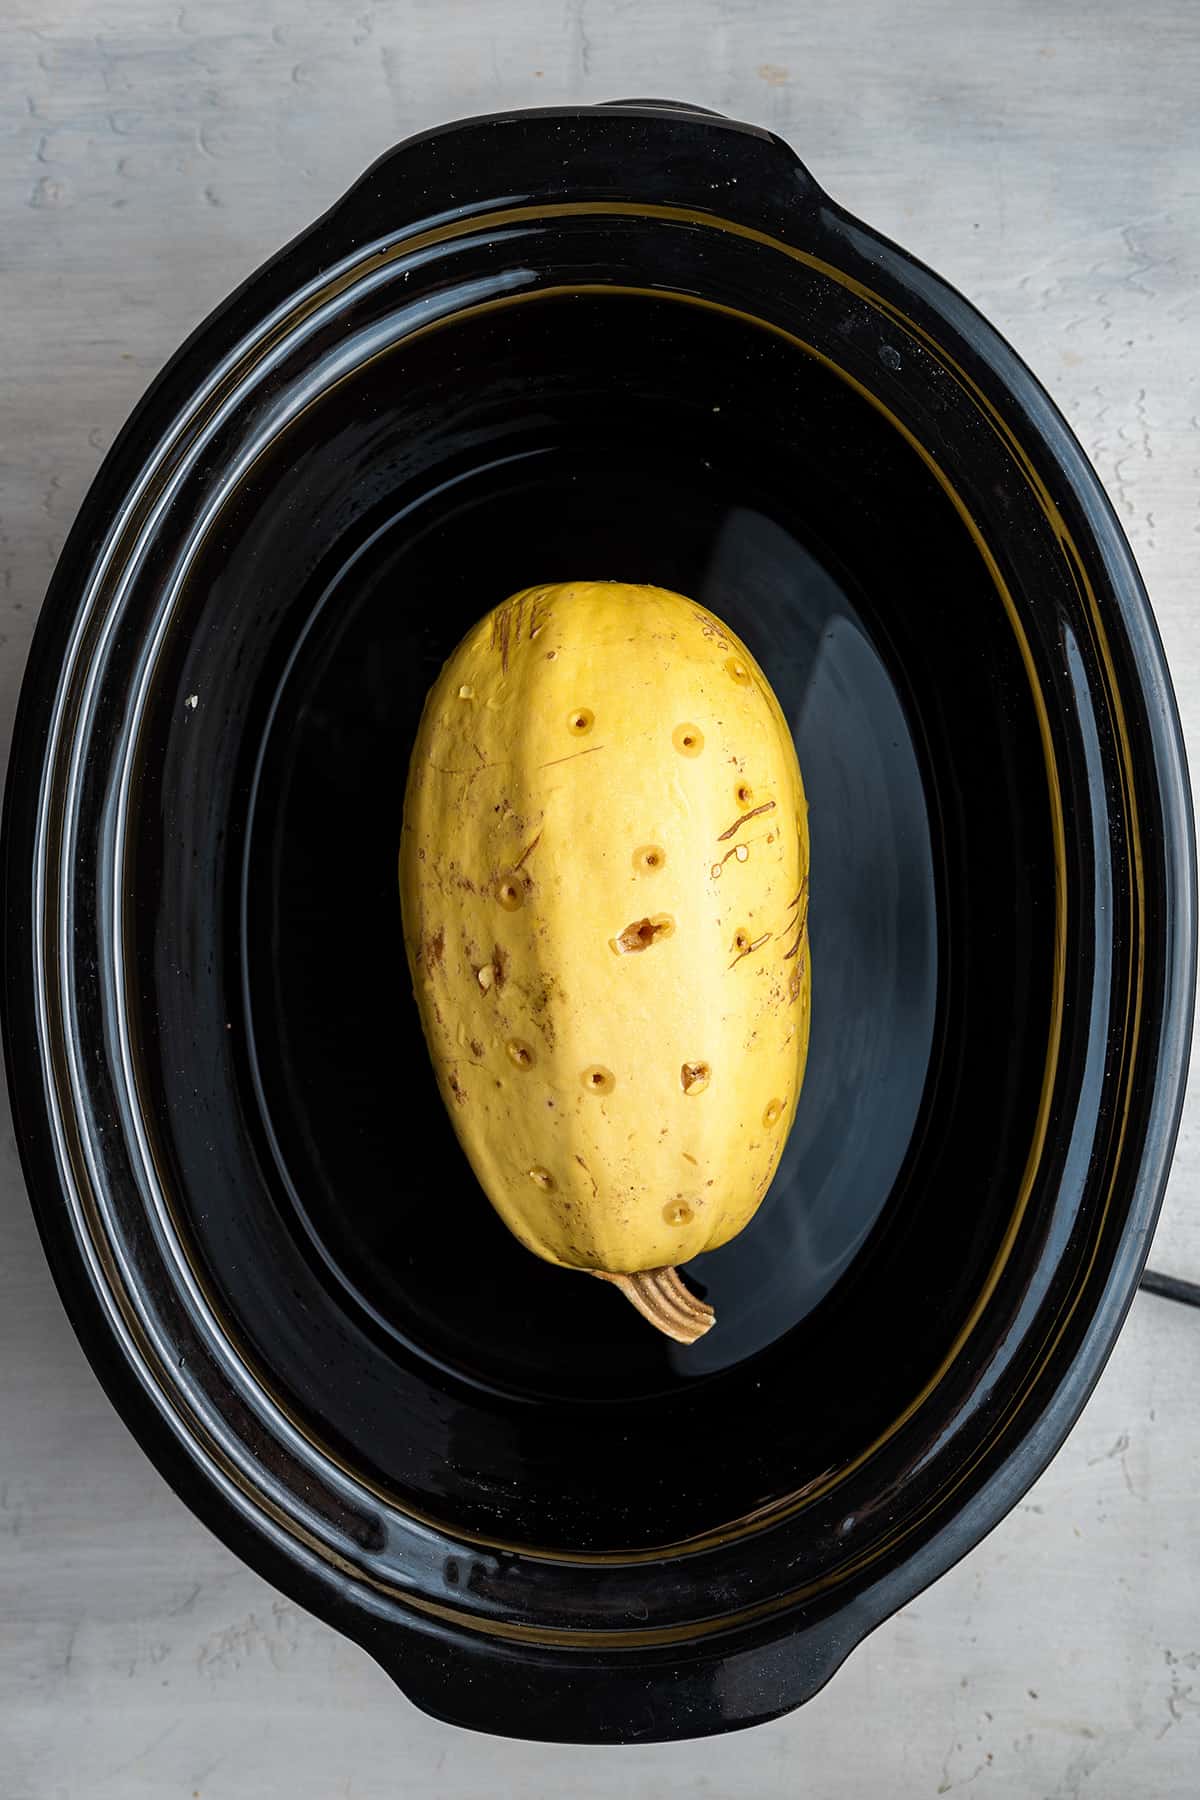 A whole spaghetti squash, with holes poked in it, inside a slow cooker